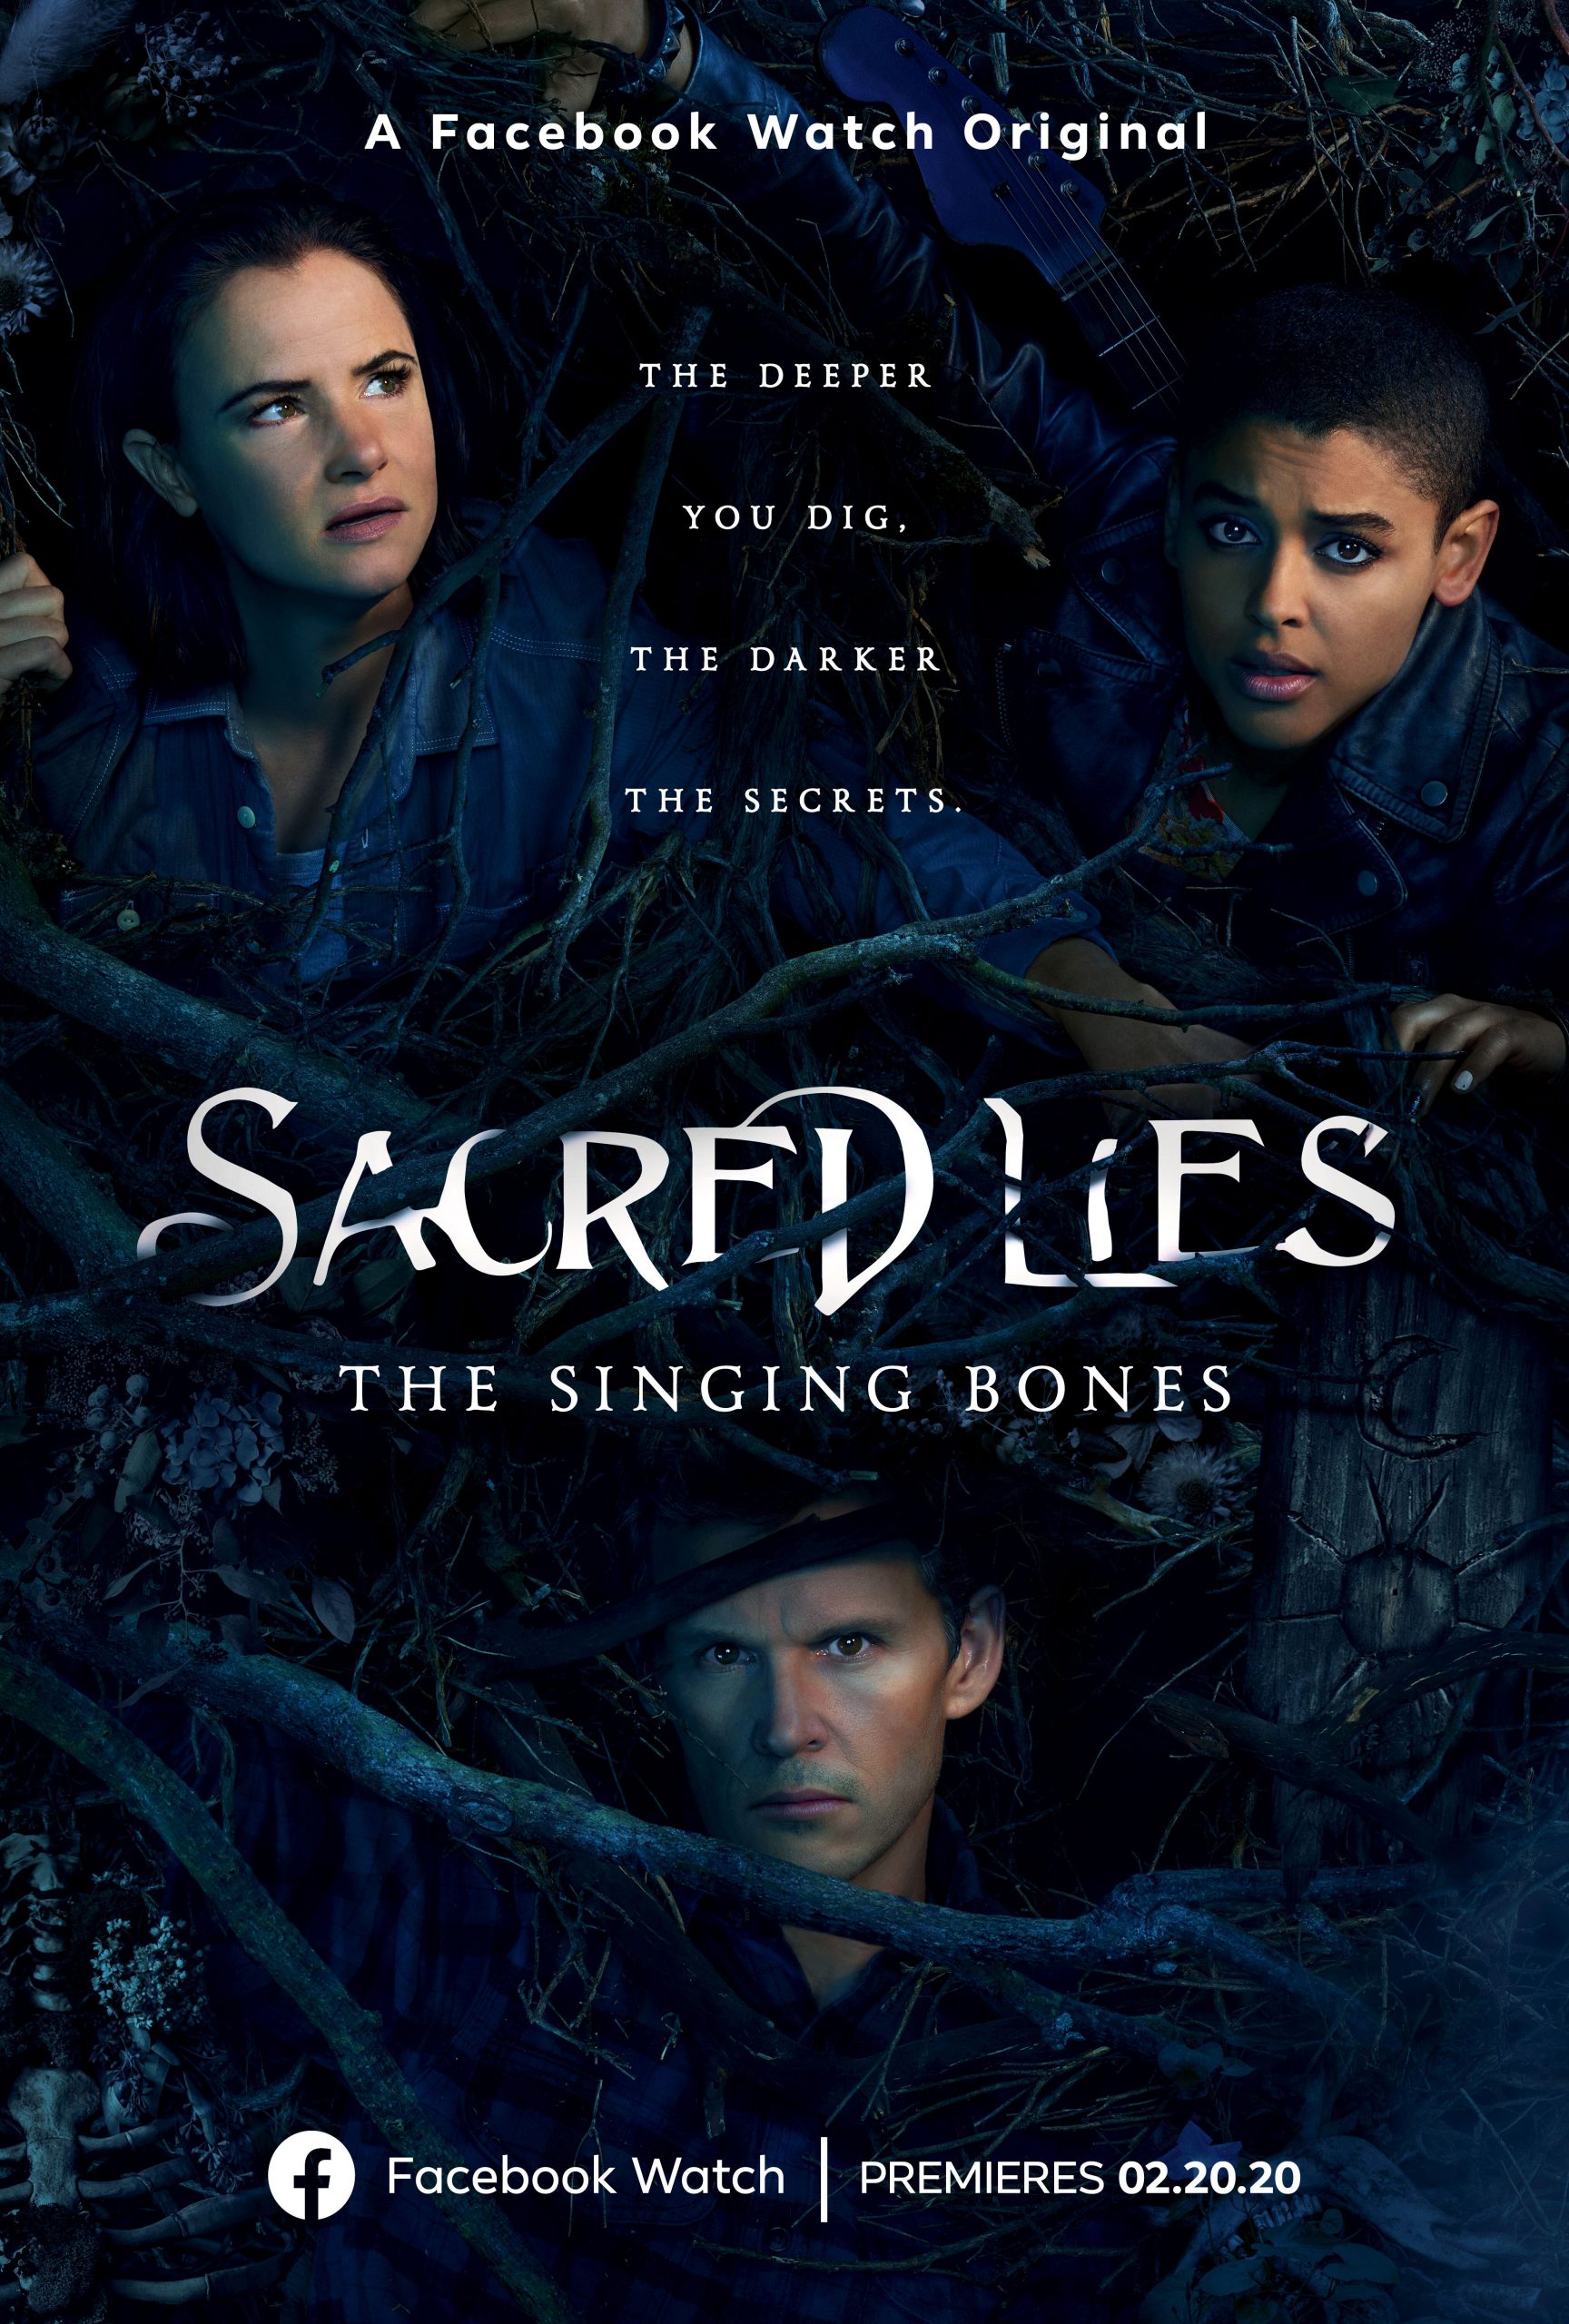 [News] Trailer Released for SACRED LIES: THE SINGING BONES